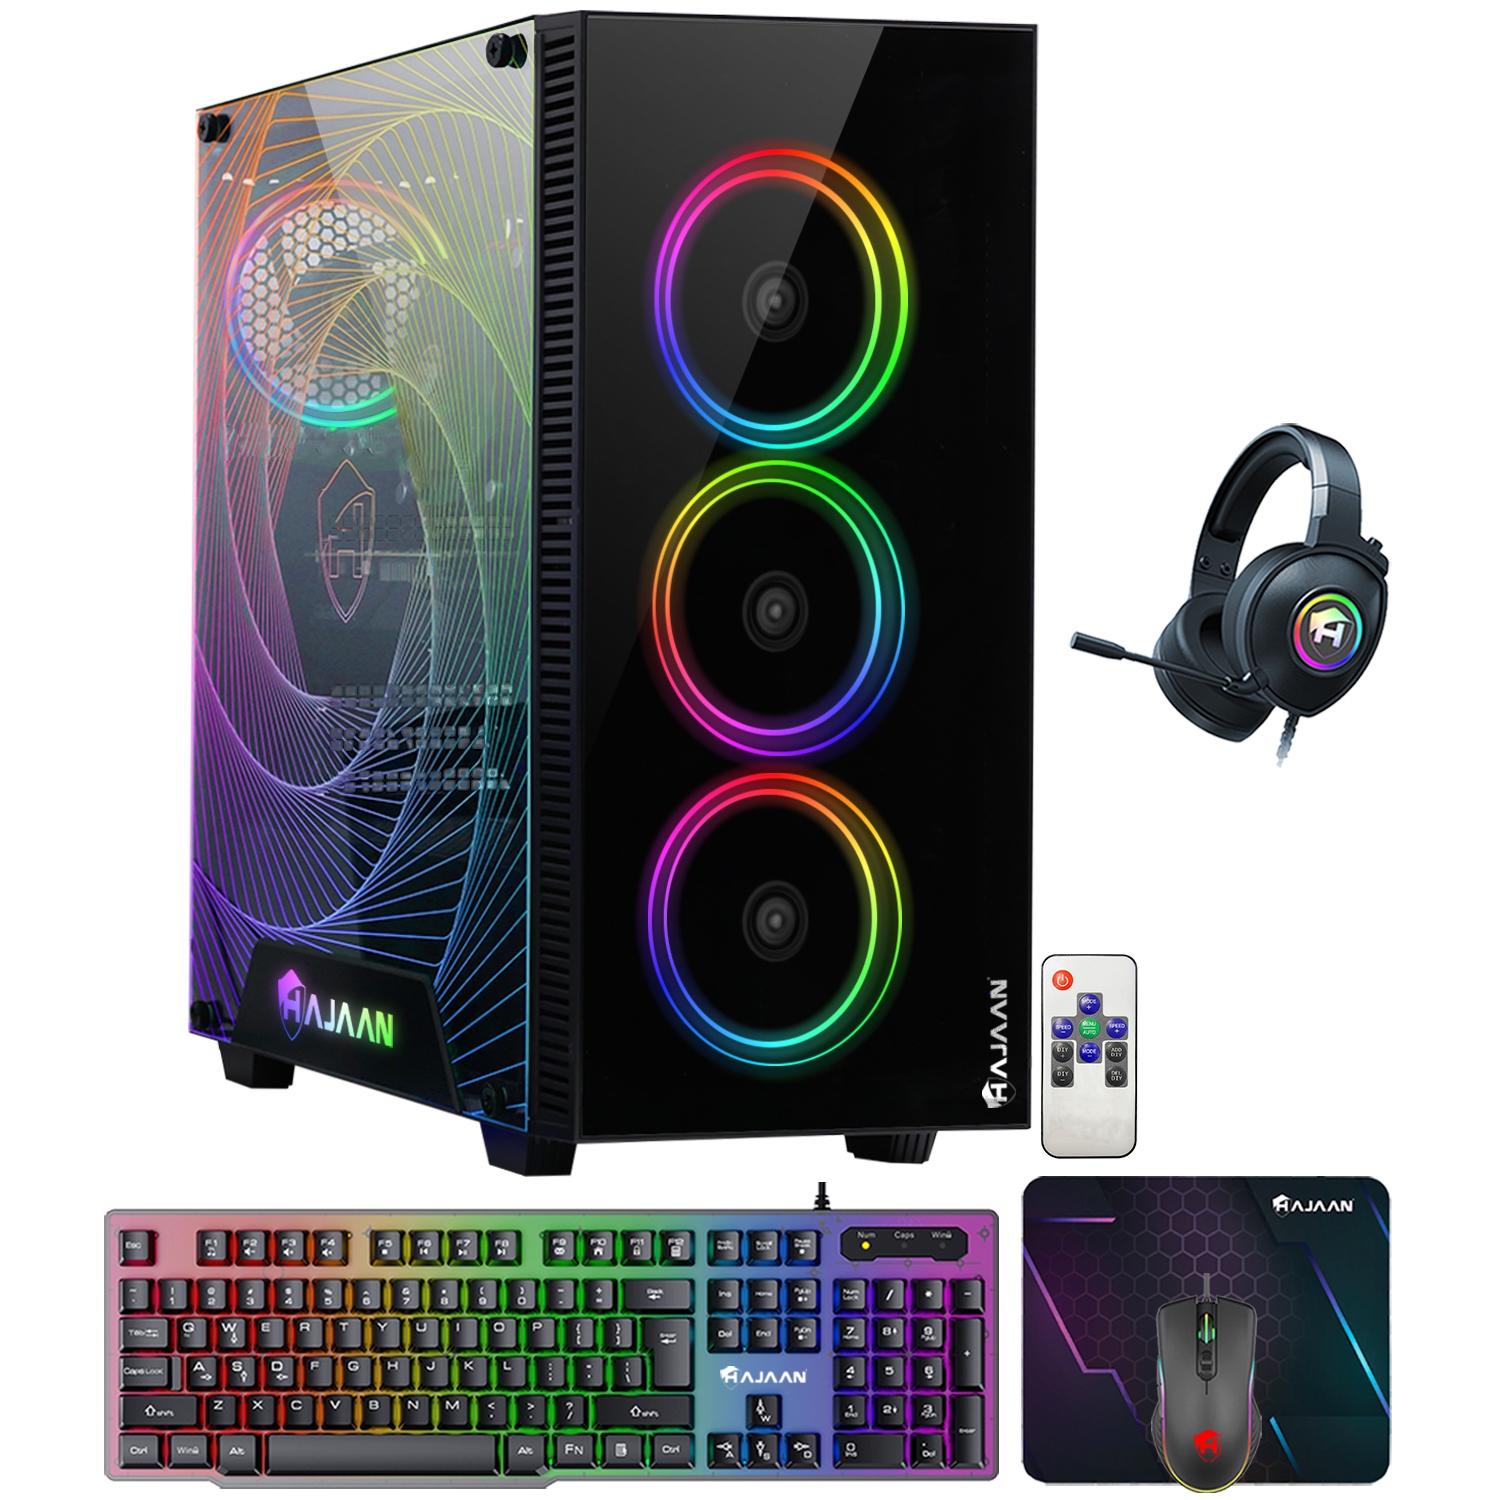 HAJAAN CYCLONIA Gaming Tower Computer Desktop PC - AMD Ryzen 5 5600G Processor Up to 4.4GHz - RTX 3060 12G GDDR6 - 32GB DDR4 - 1TB SSD - Windows 11 Pro - Keyboard Mouse and Headset